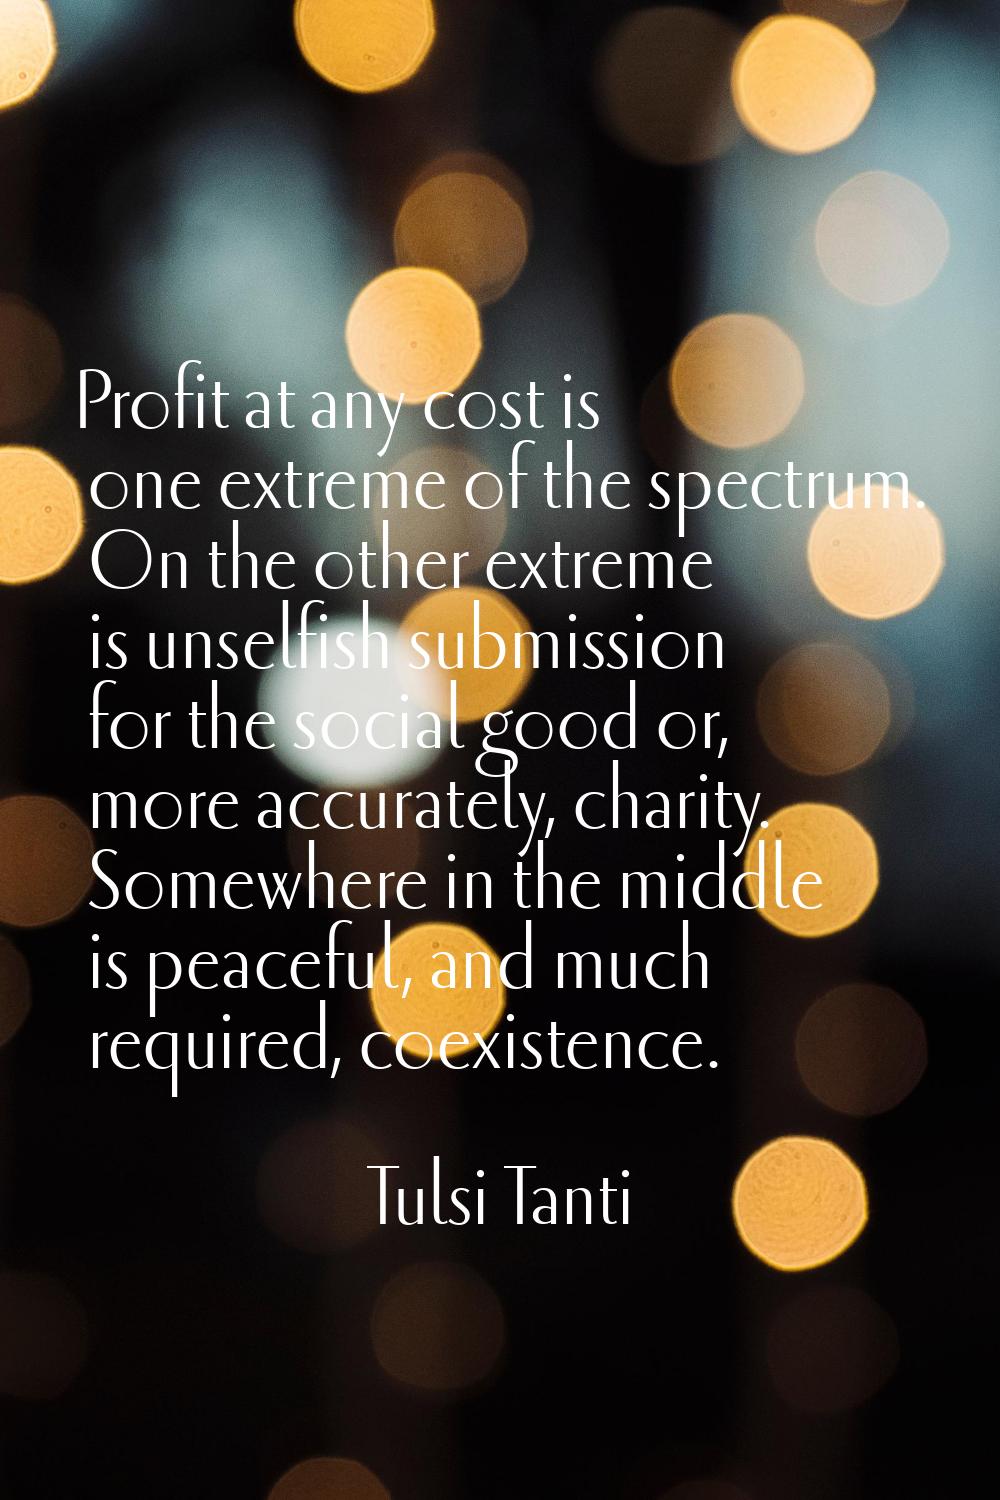 Profit at any cost is one extreme of the spectrum. On the other extreme is unselfish submission for